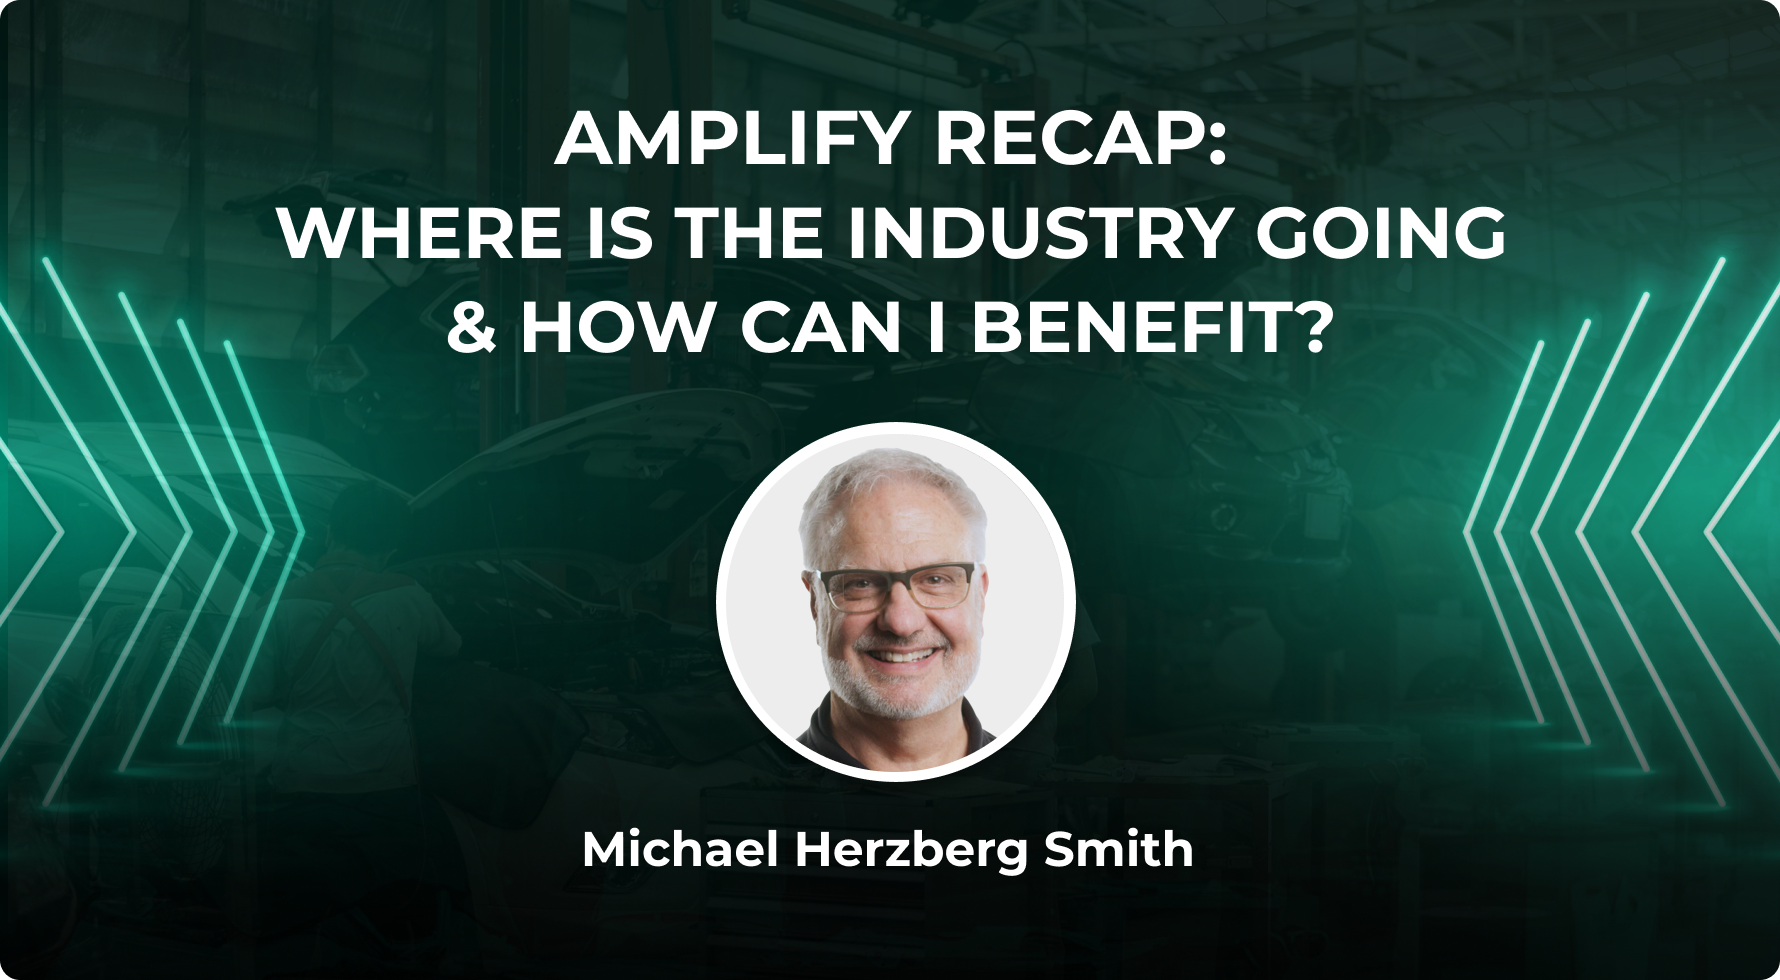 Amplify Recap: Where Is The Industry Going & How Can I Benefit?